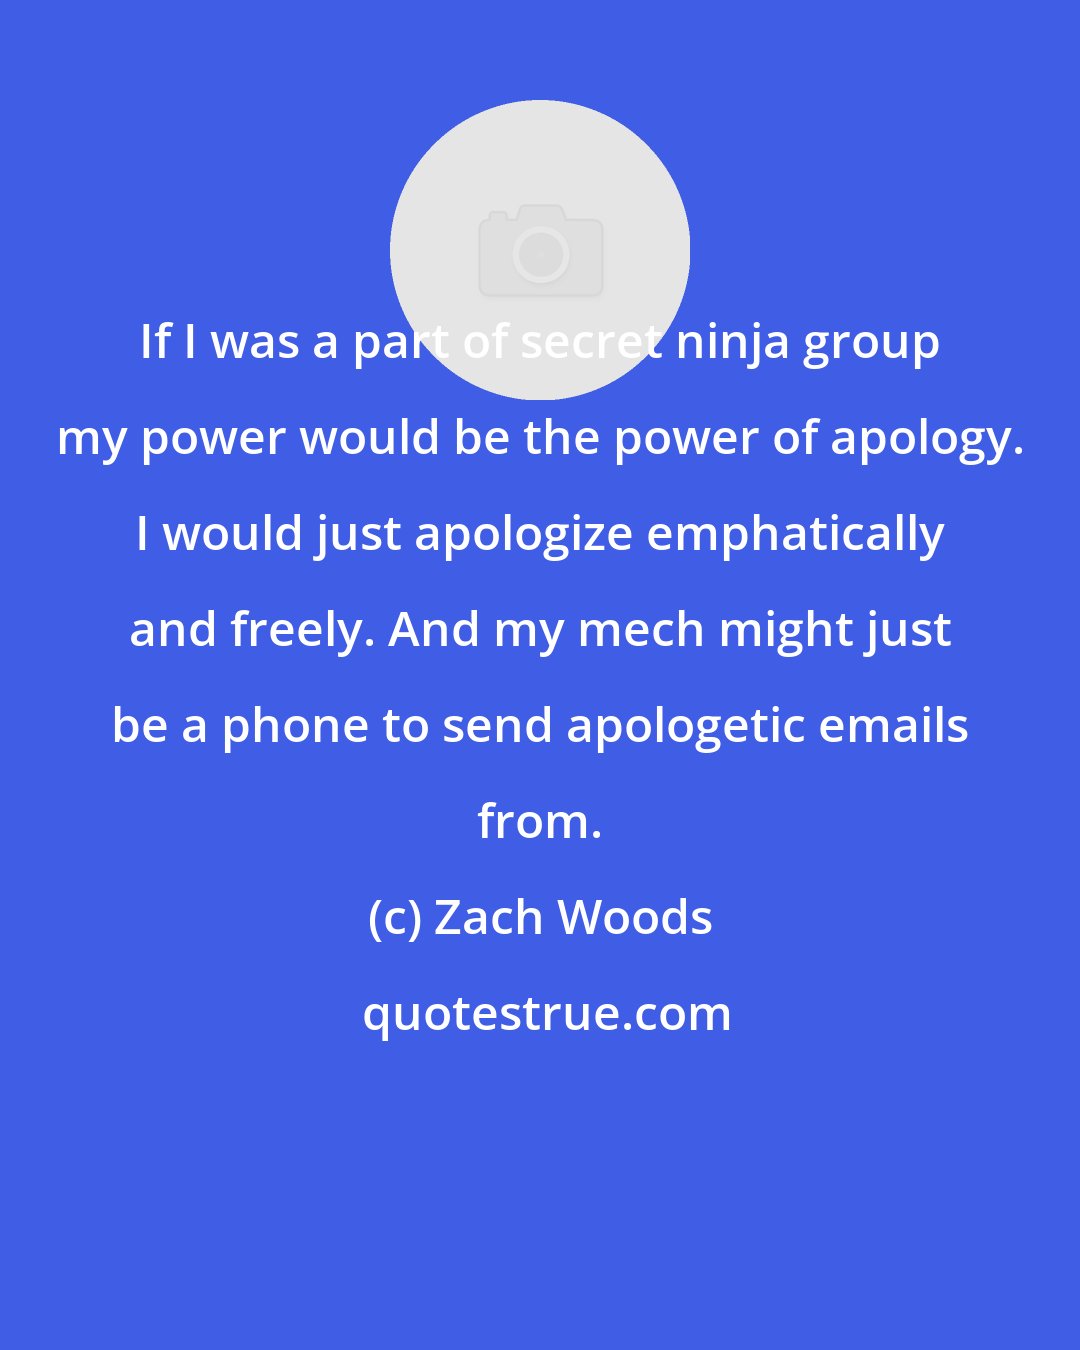 Zach Woods: If I was a part of secret ninja group my power would be the power of apology. I would just apologize emphatically and freely. And my mech might just be a phone to send apologetic emails from.